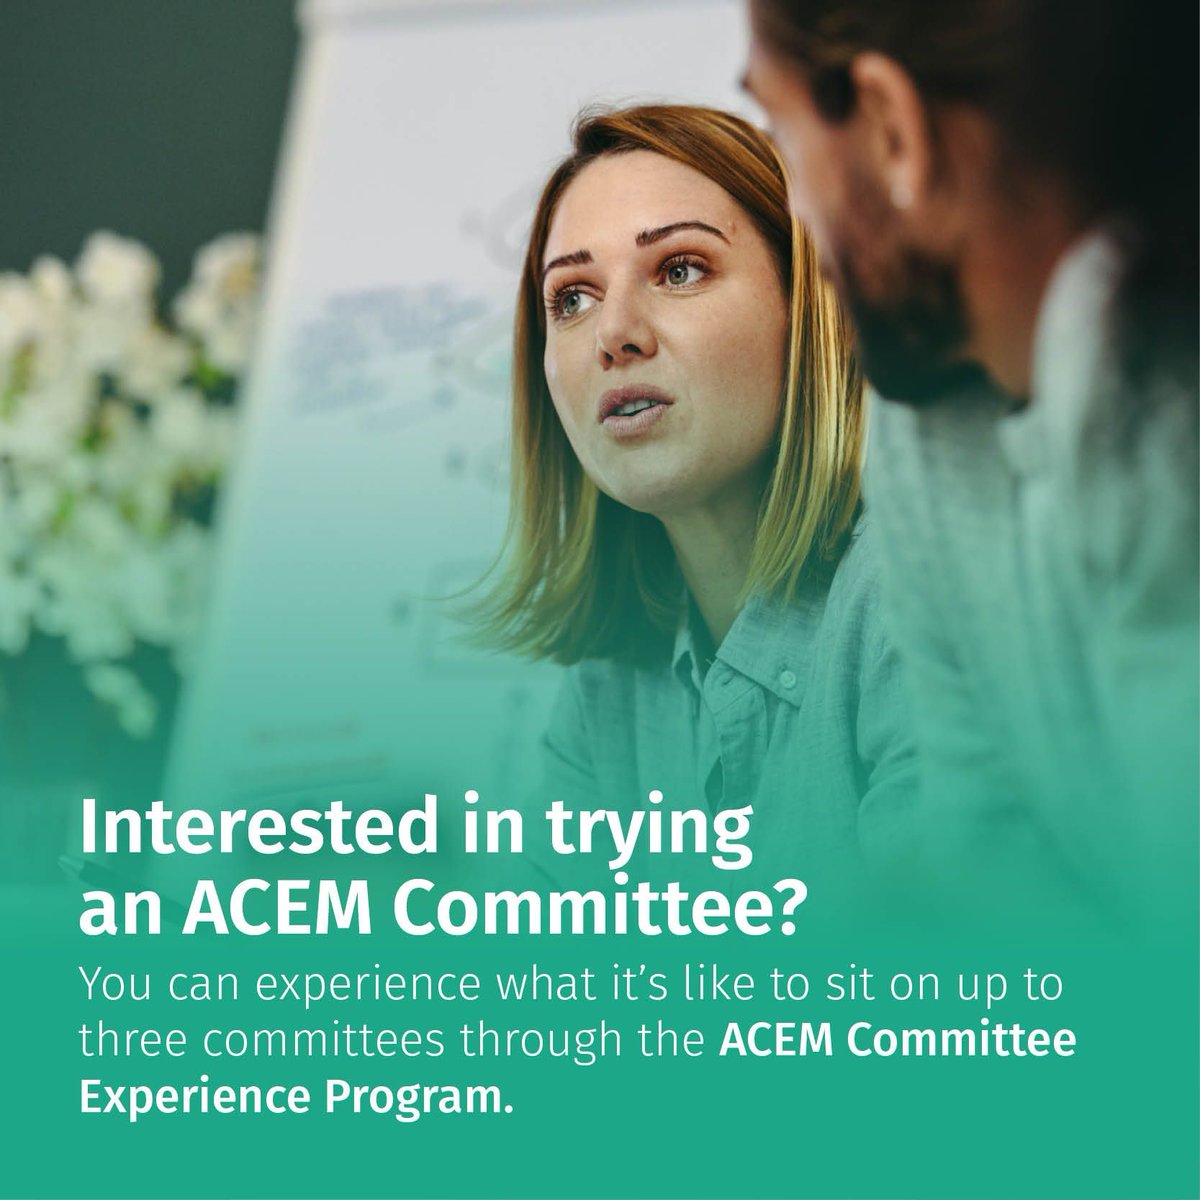 Do you want to shape the future of EM but not sure how to take the next step? You can experience what it's like to sit on up to three committees that interest you, to see which will be the best fit, before applying to be a full time member. Learn more: ace.mn/CEP